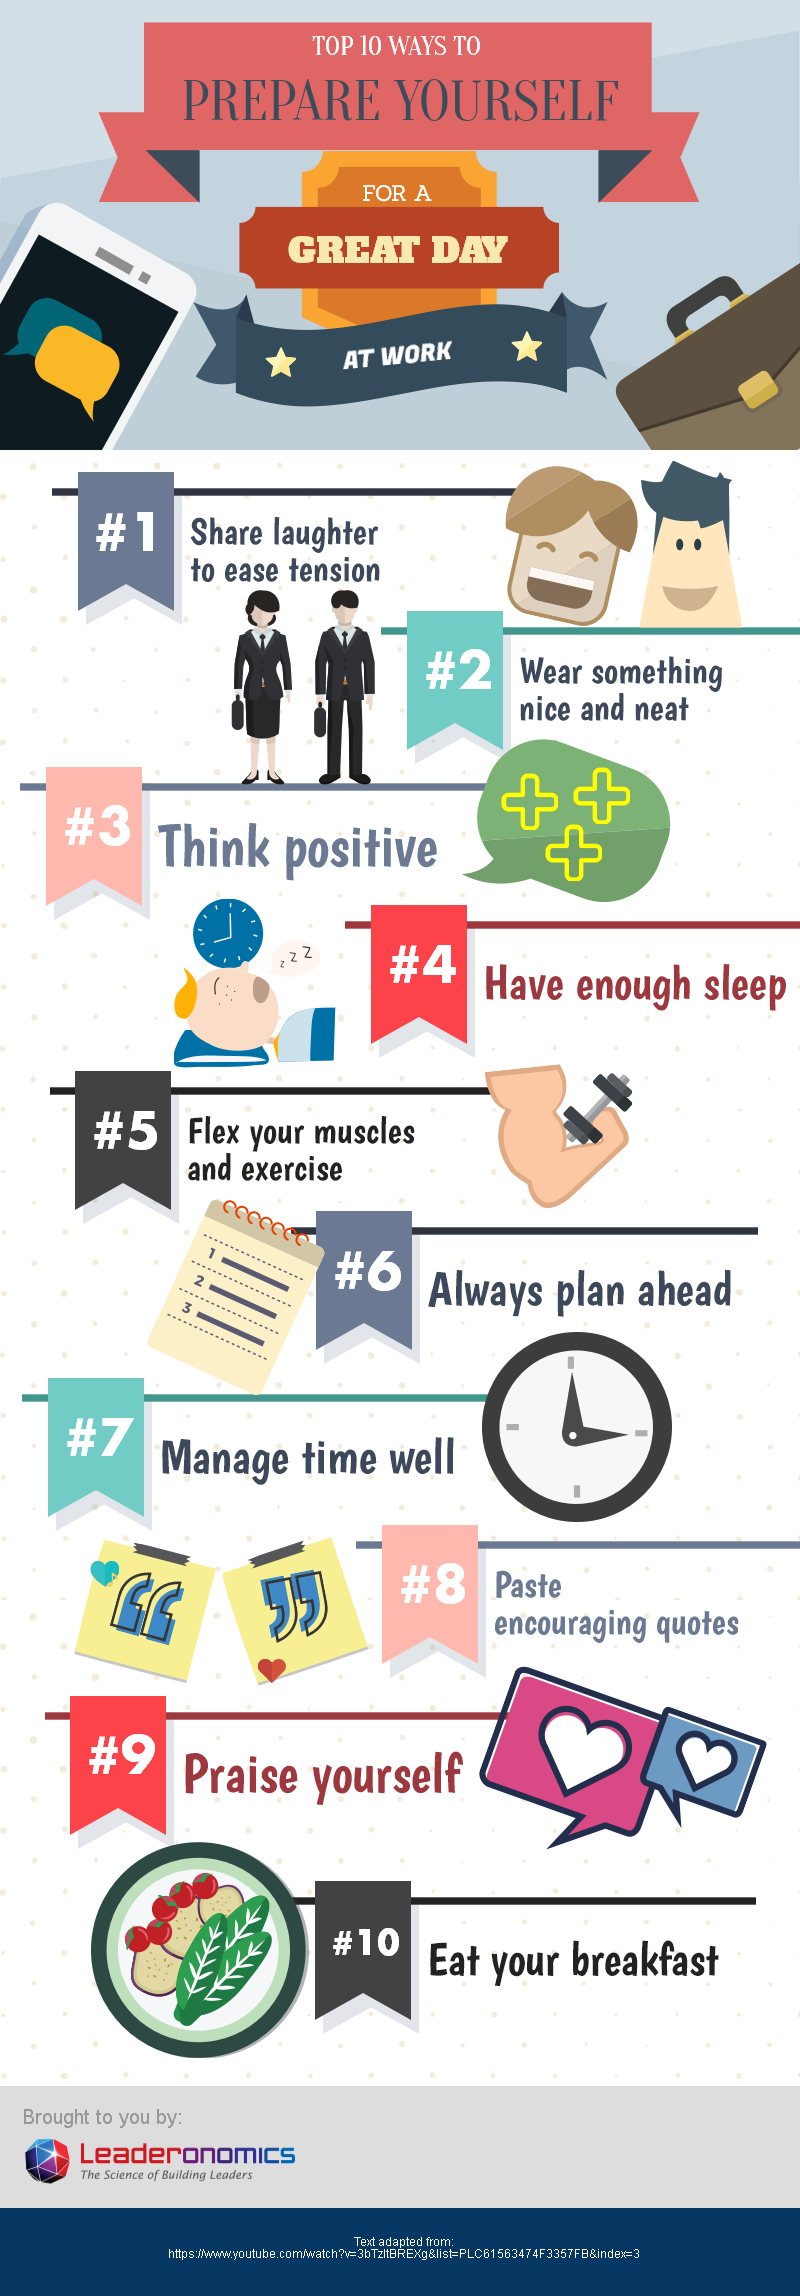 10 ways for a great day at work